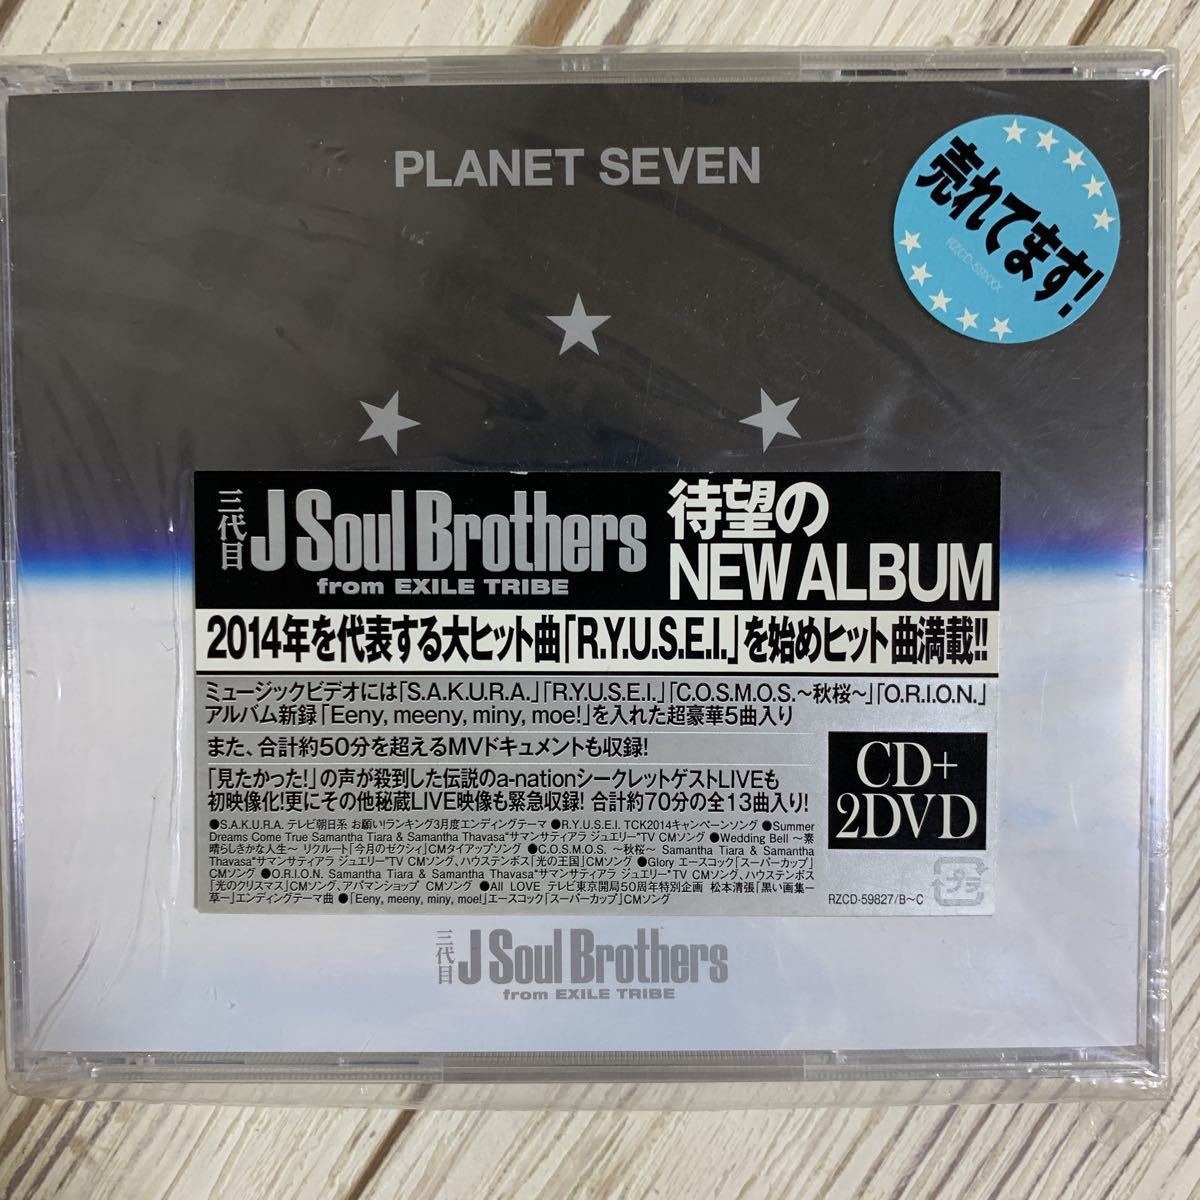 Paypayフリマ 三代目 J Soul Brothers From Exile Tribe Planet Seven Cd 2dvd